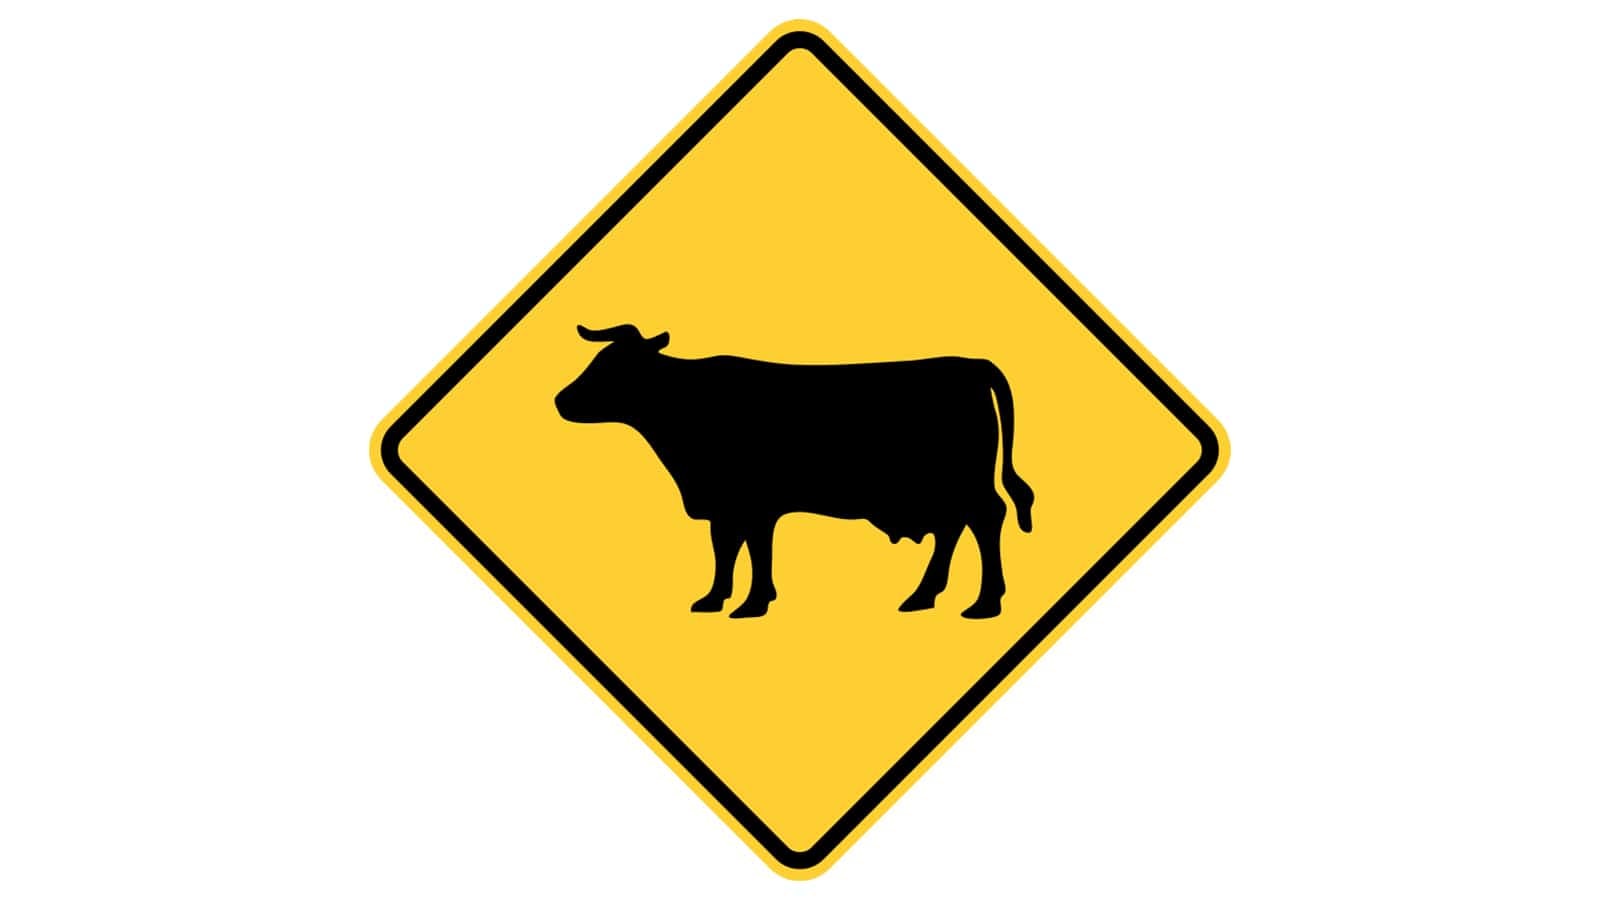 Warning sign Cattle Crossing